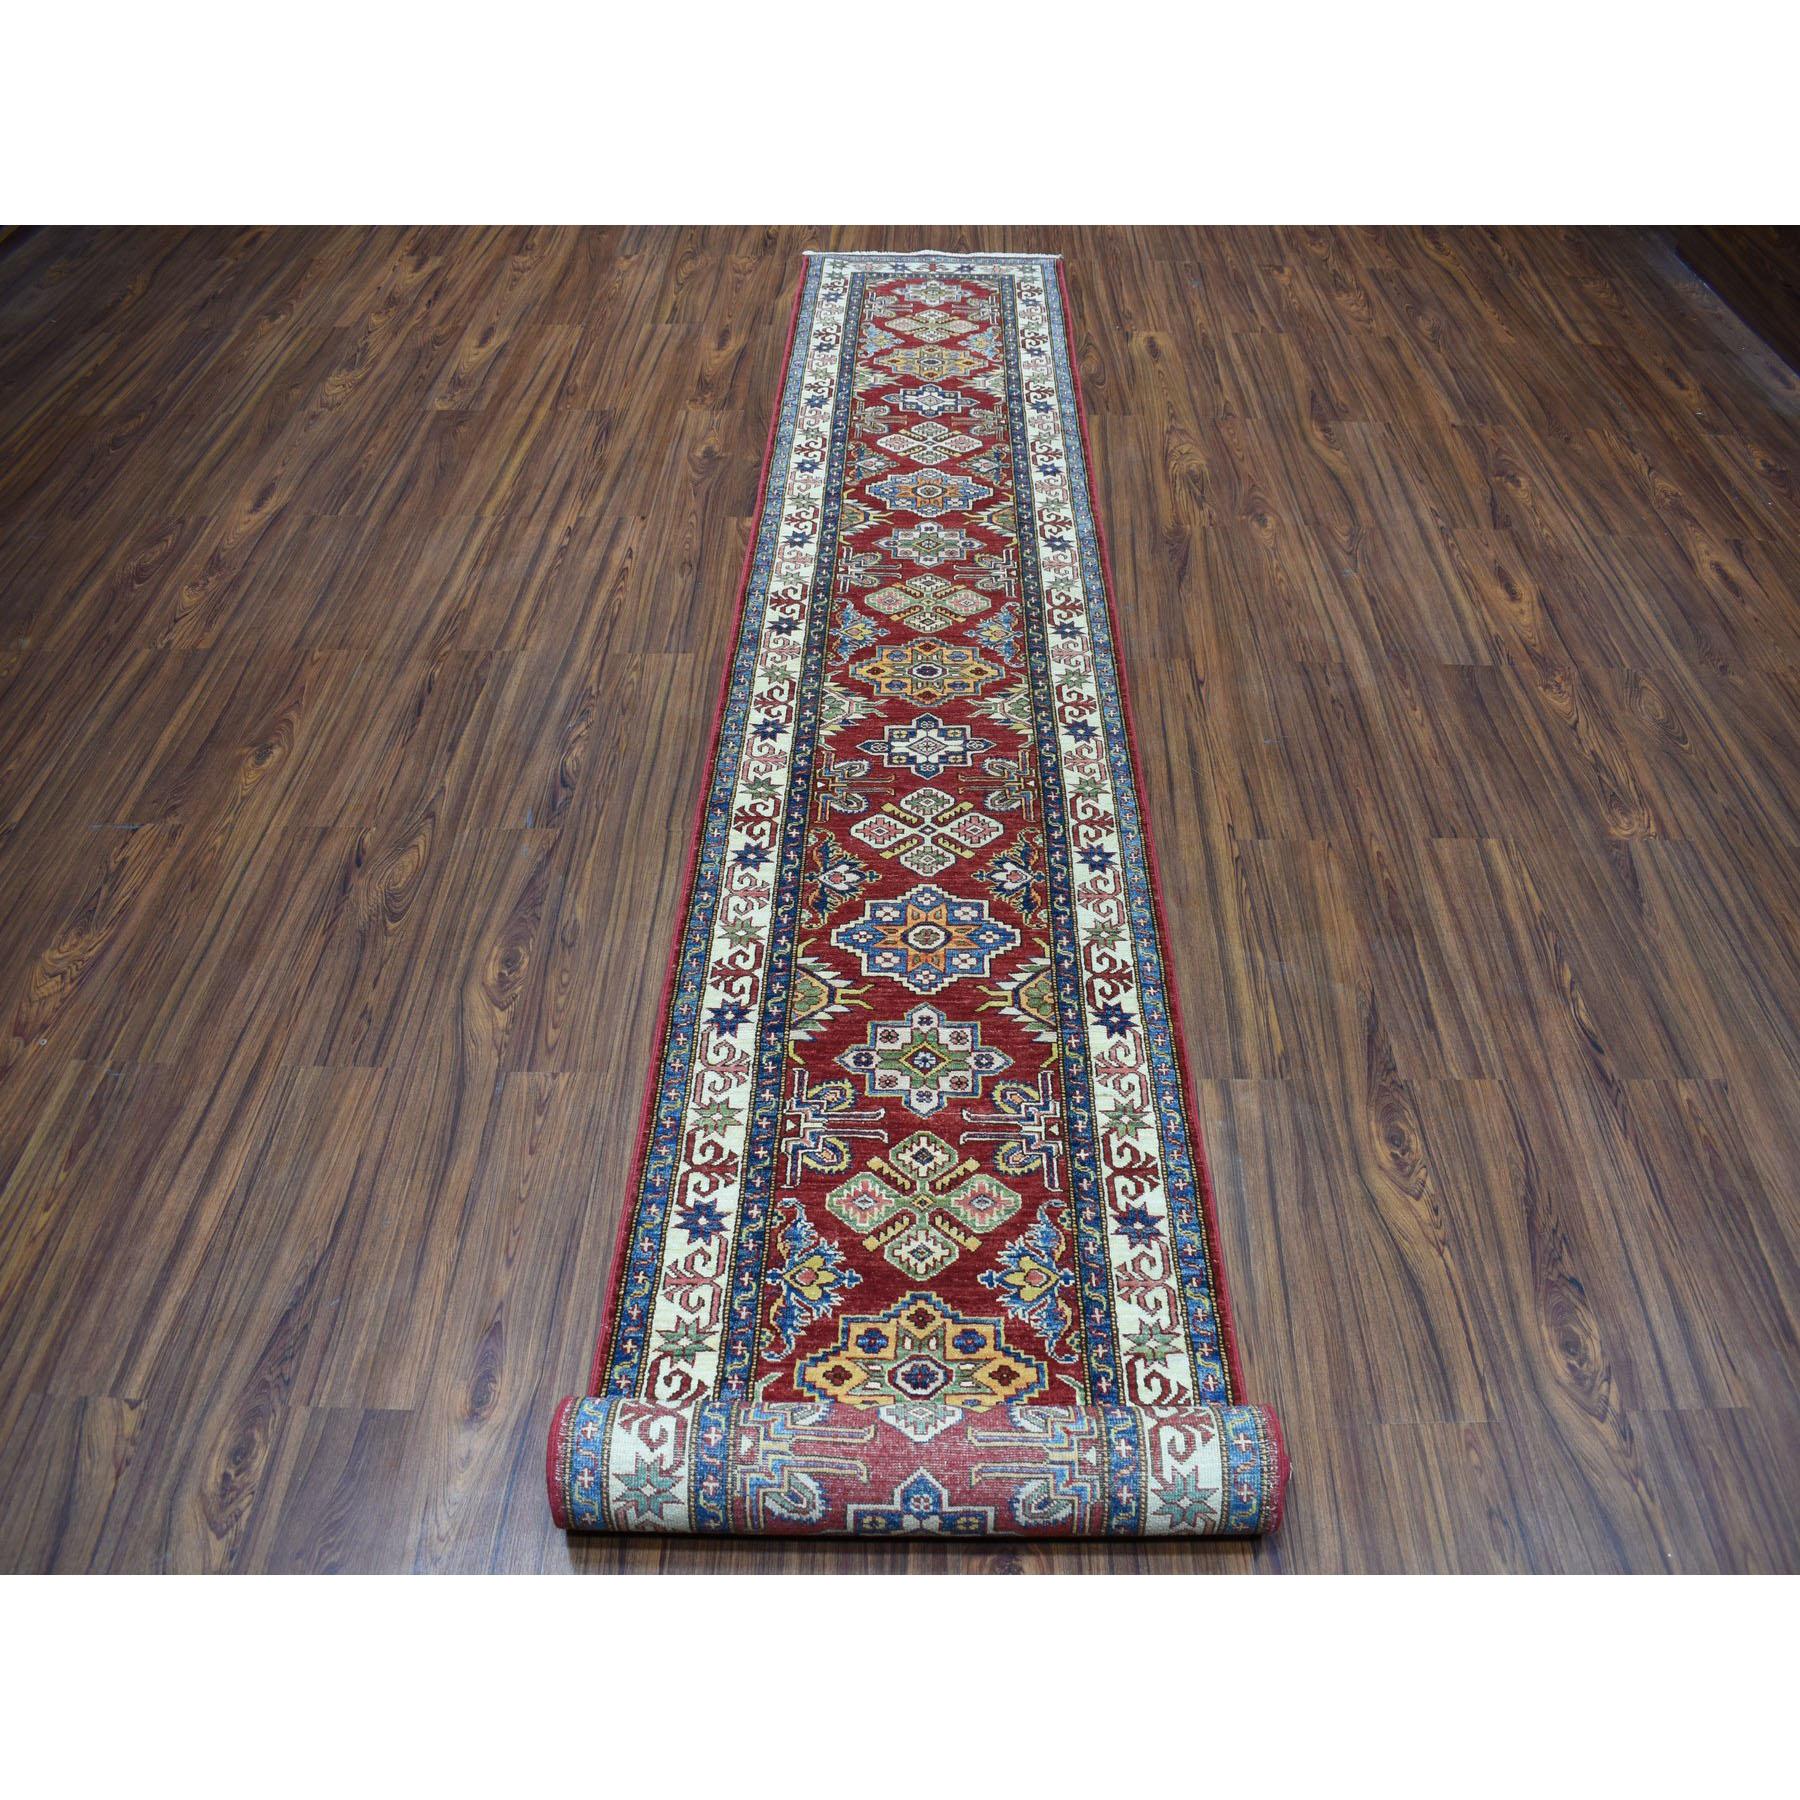 This is a truly genuine one-of-a-kind Red Super Kazak Geometric Design XL Runner Pure Wool Hand-Knotted Rug. It has been Knotted for months and months in the centuries-old Persian weaving craftsmanship techniques by expert artisans. 
Primary